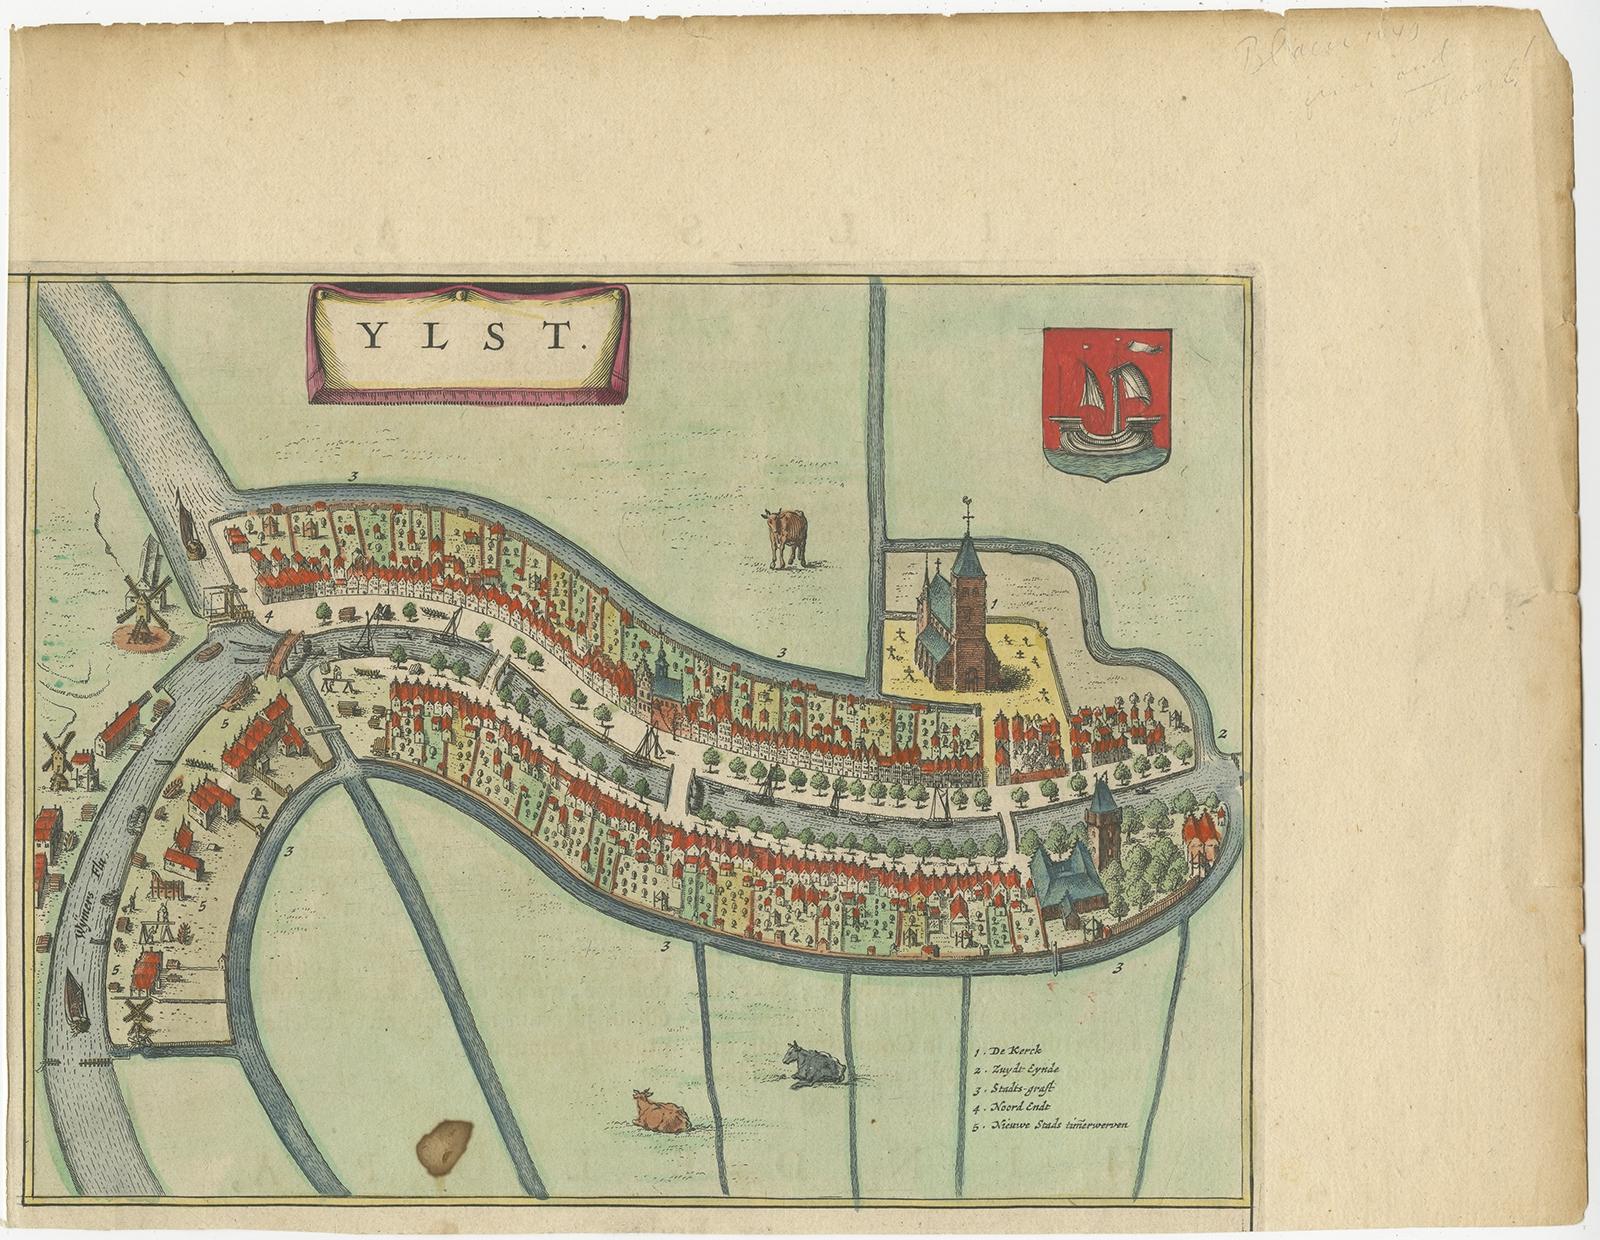 Antique hand-colored map titled 'Ylst'. Original antique map of the city of IJlst, Friesland, the Netherlands. 

This map originates from 'Novum Ac Magnum Theatrum Urbium Belgicae Liberae Ac Foederatae' published by J. Blaeu. 

Artists and